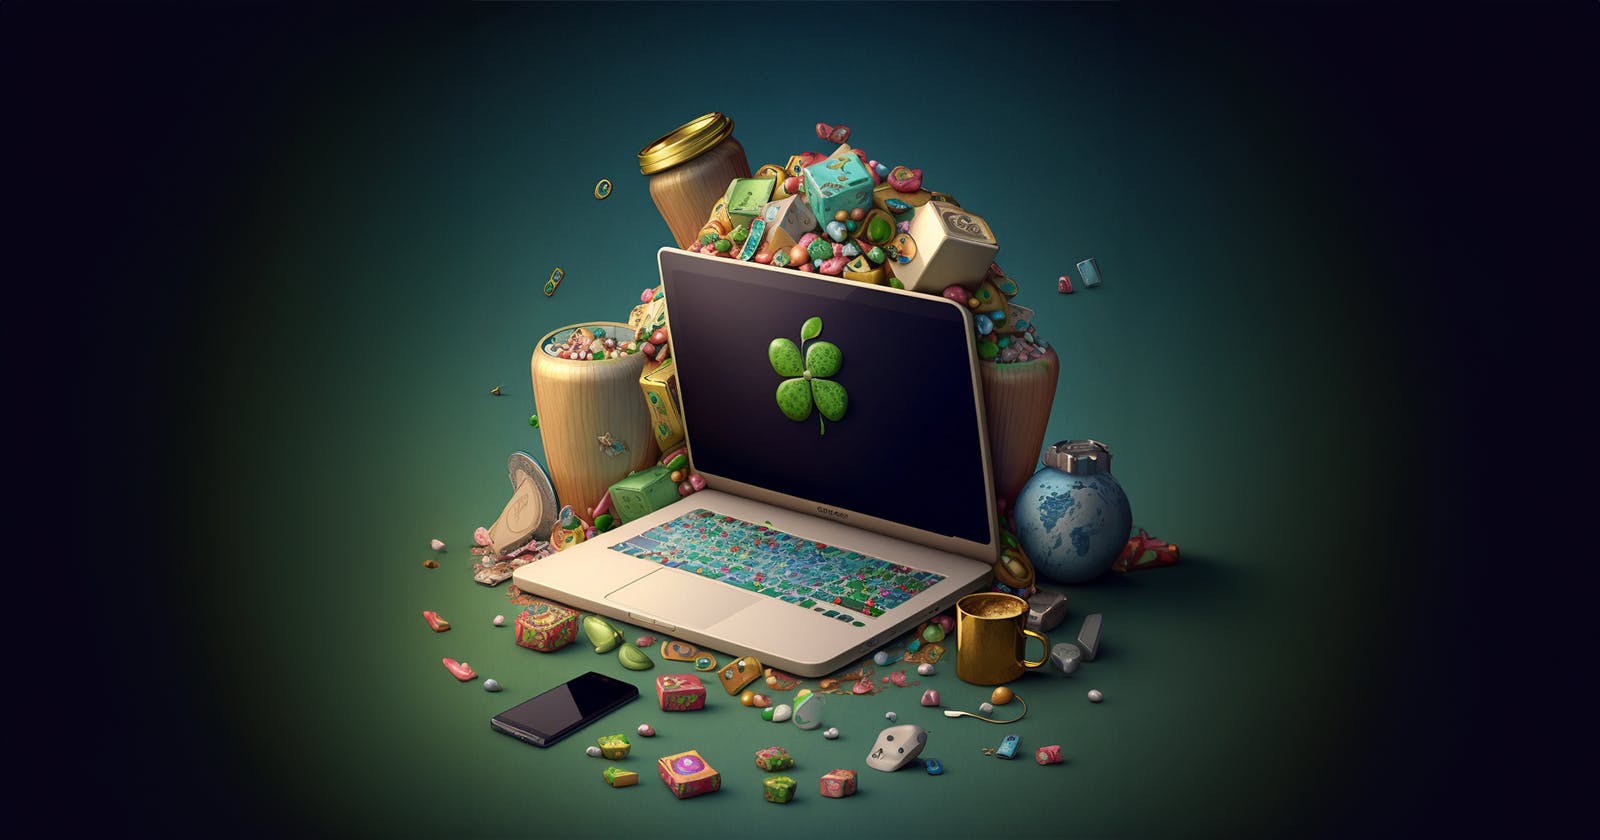 🍀 How To Get Lucky in Software Development